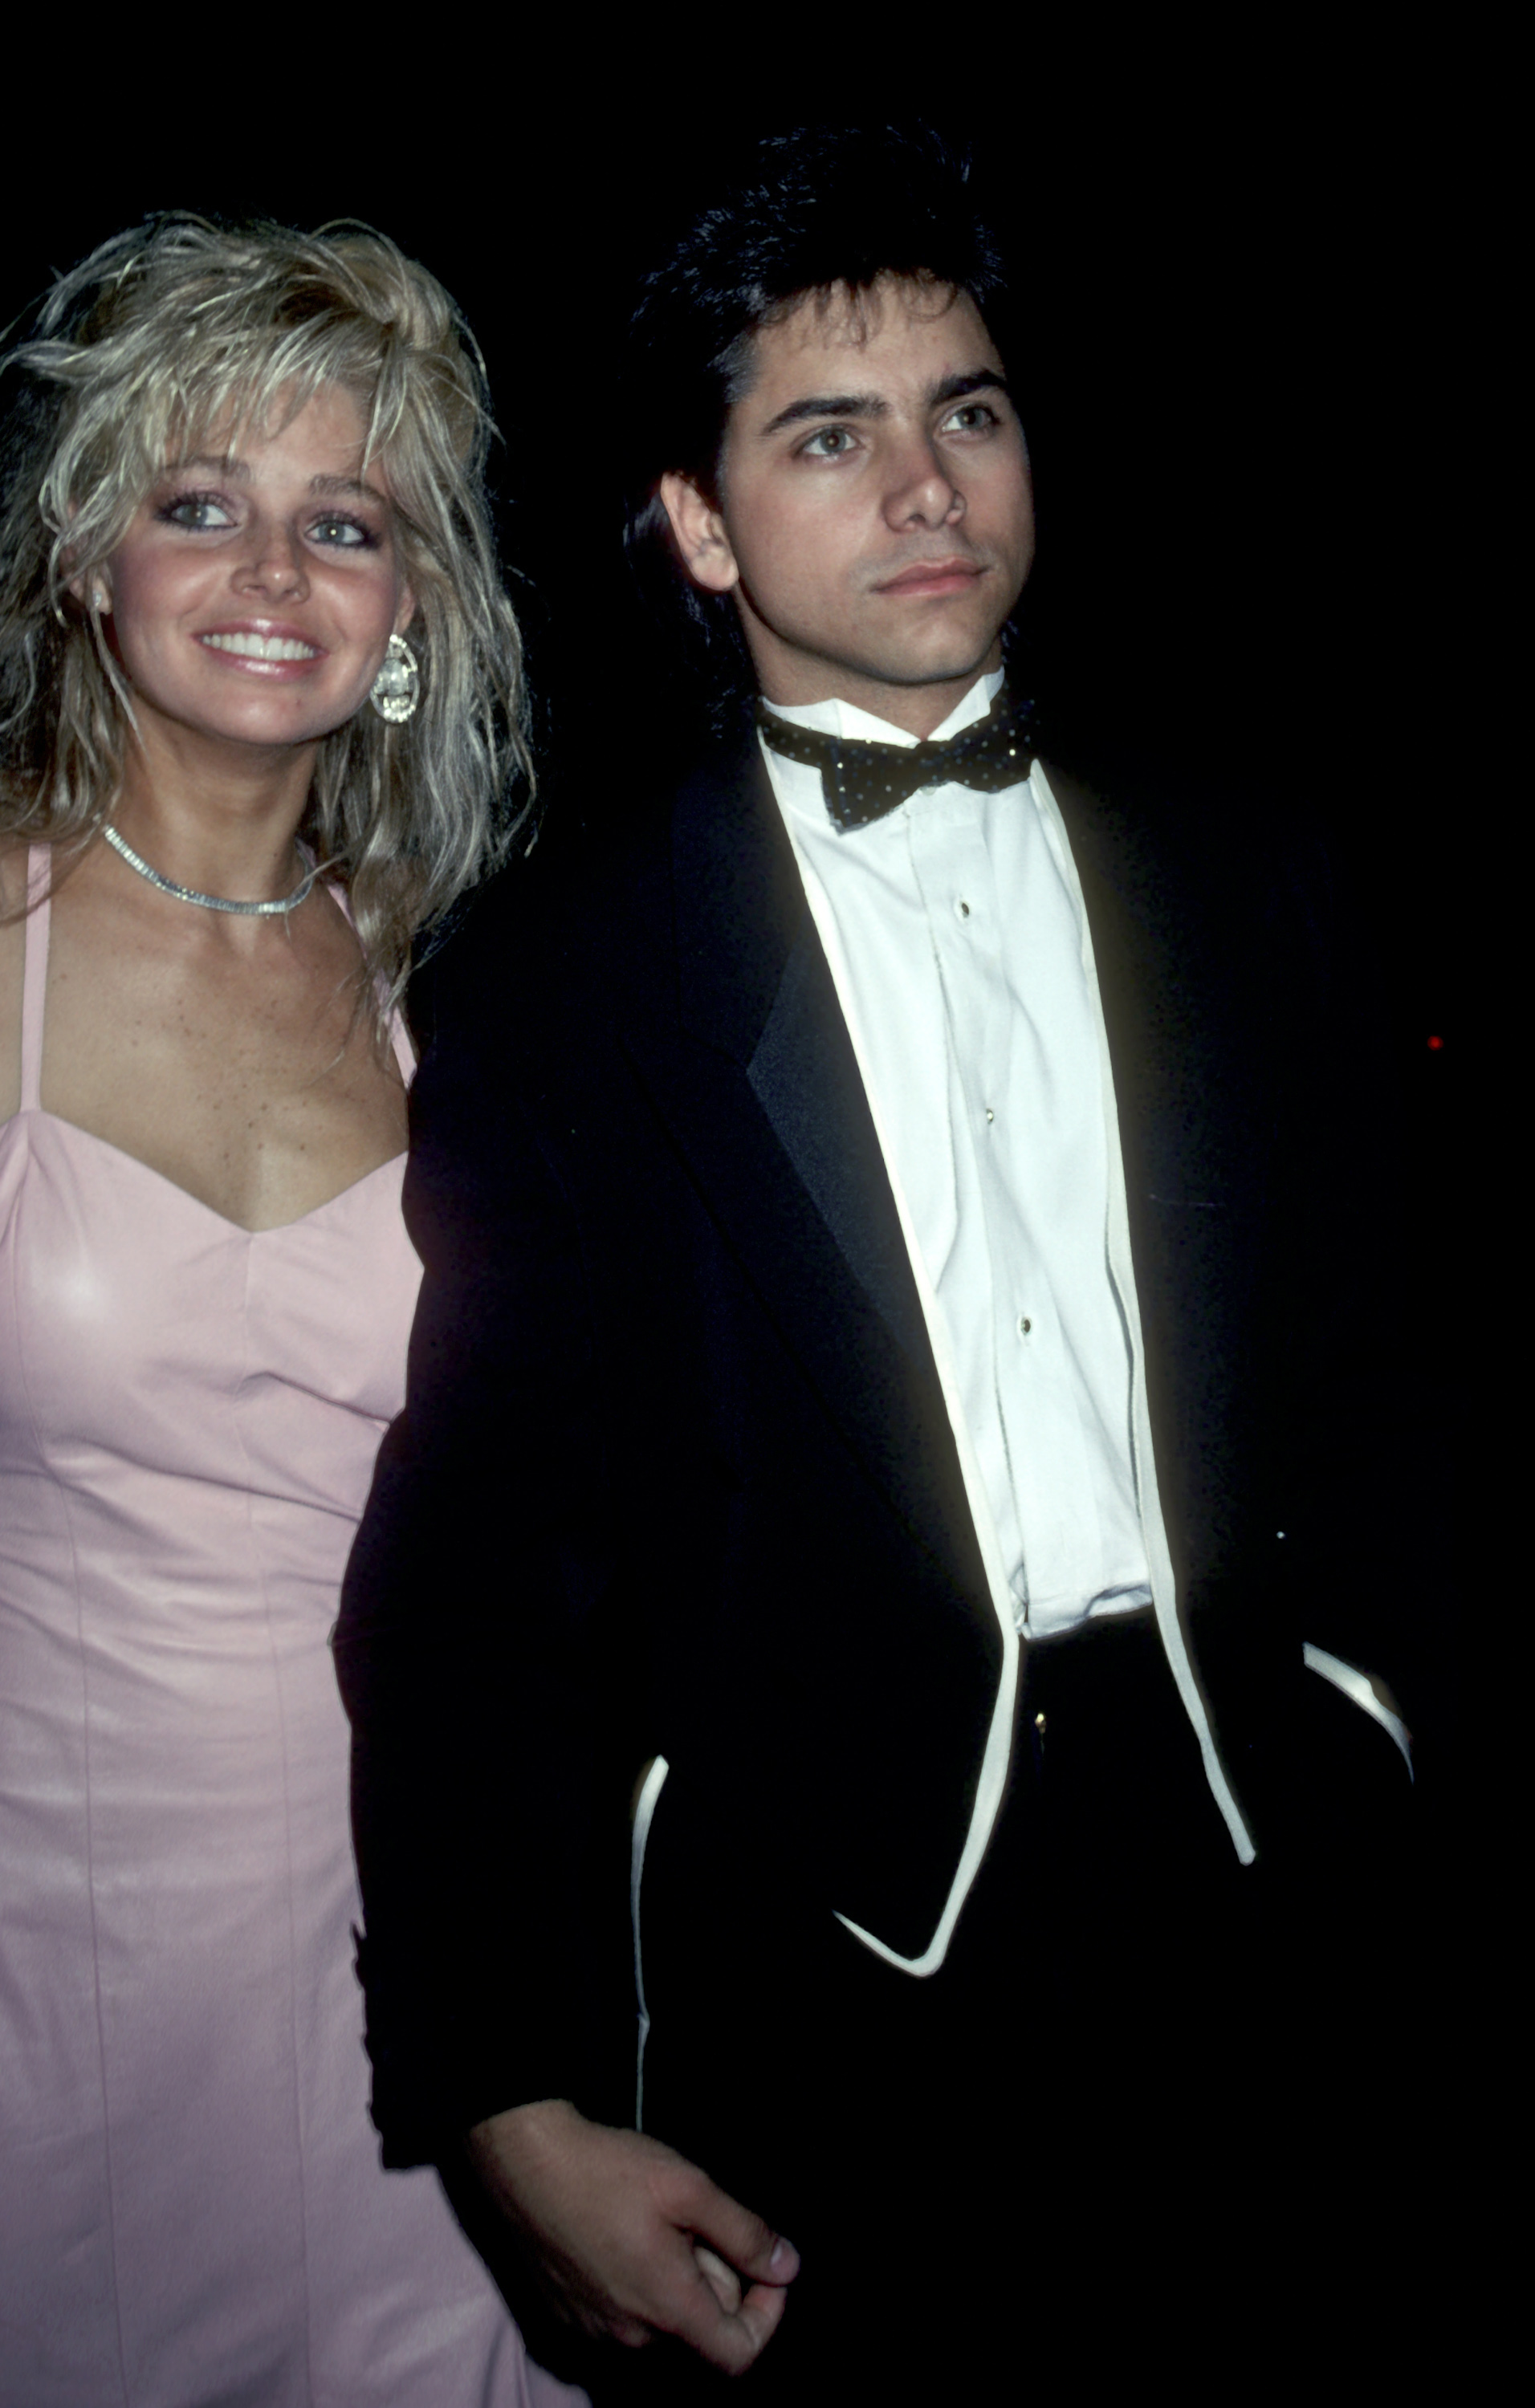 Teri Copley and John Stamos at Hollywood Palladium on April 1, 1985 in Hollywood, California. | Source: Getty Images